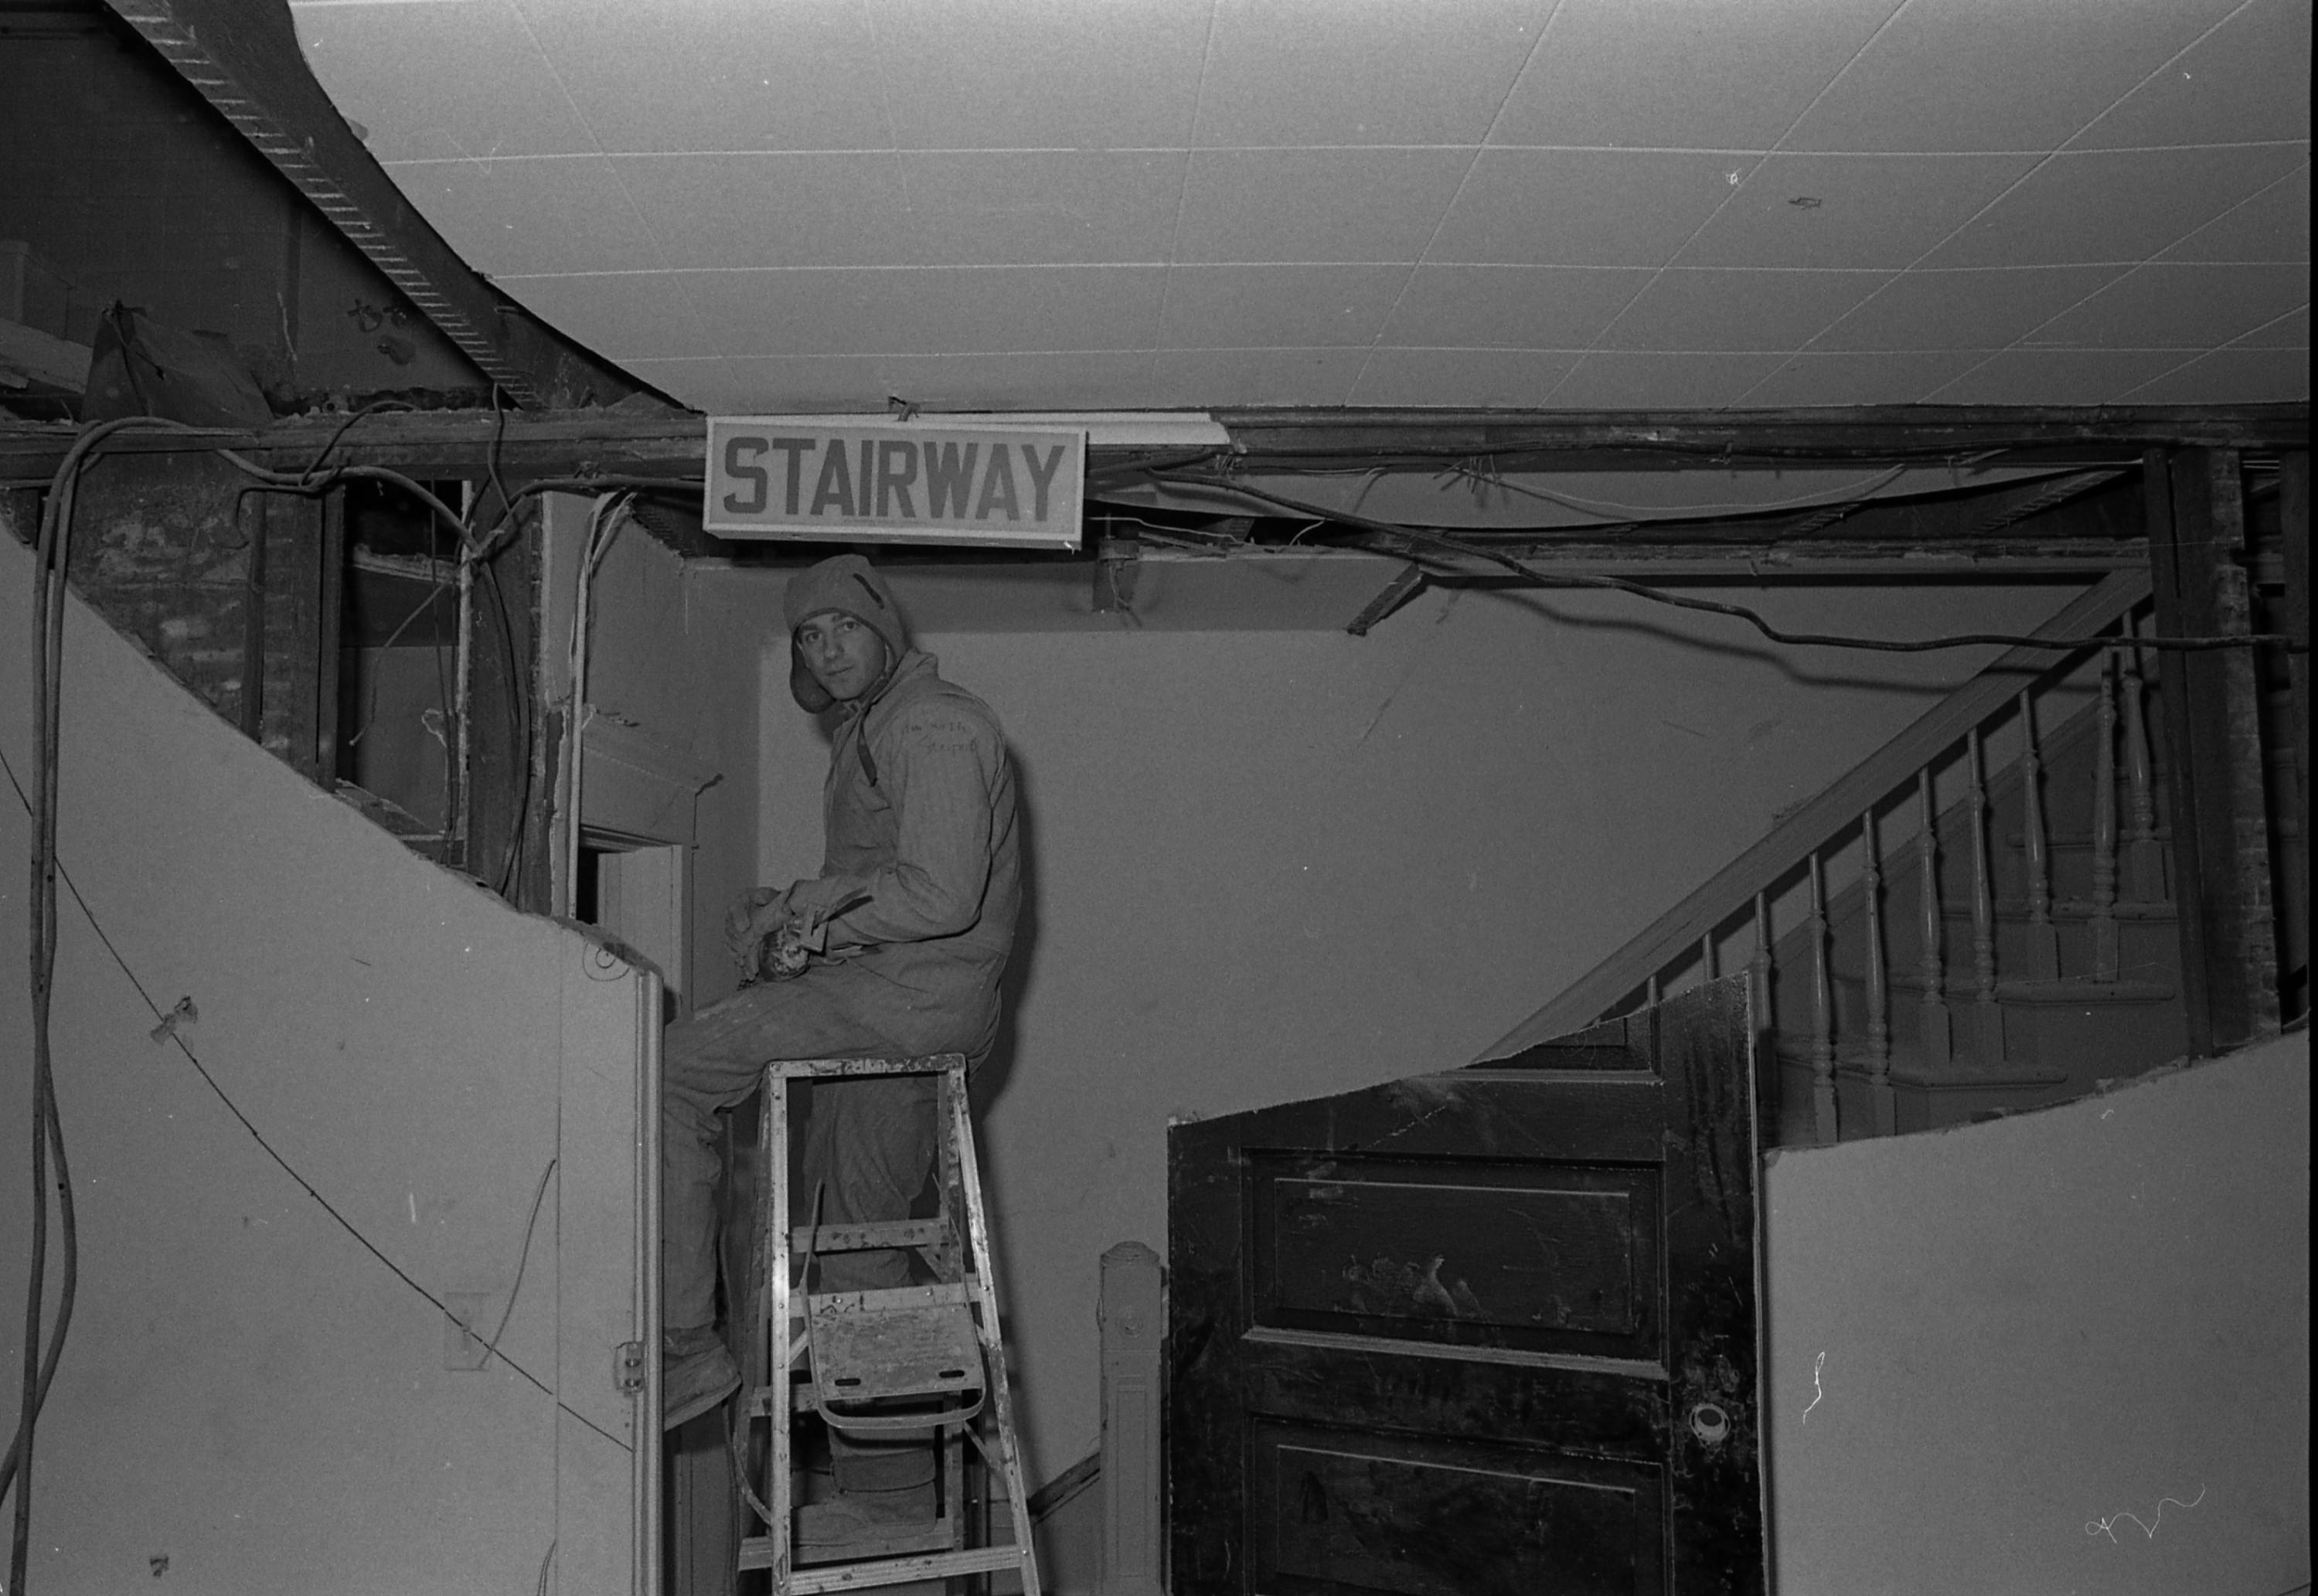 A man sits on a ladder underneath a sign that reads Stairway. The wall and door are cut in a way that they form a curve. His shirt has a handwritten phrase on it reading I'm with stupid.